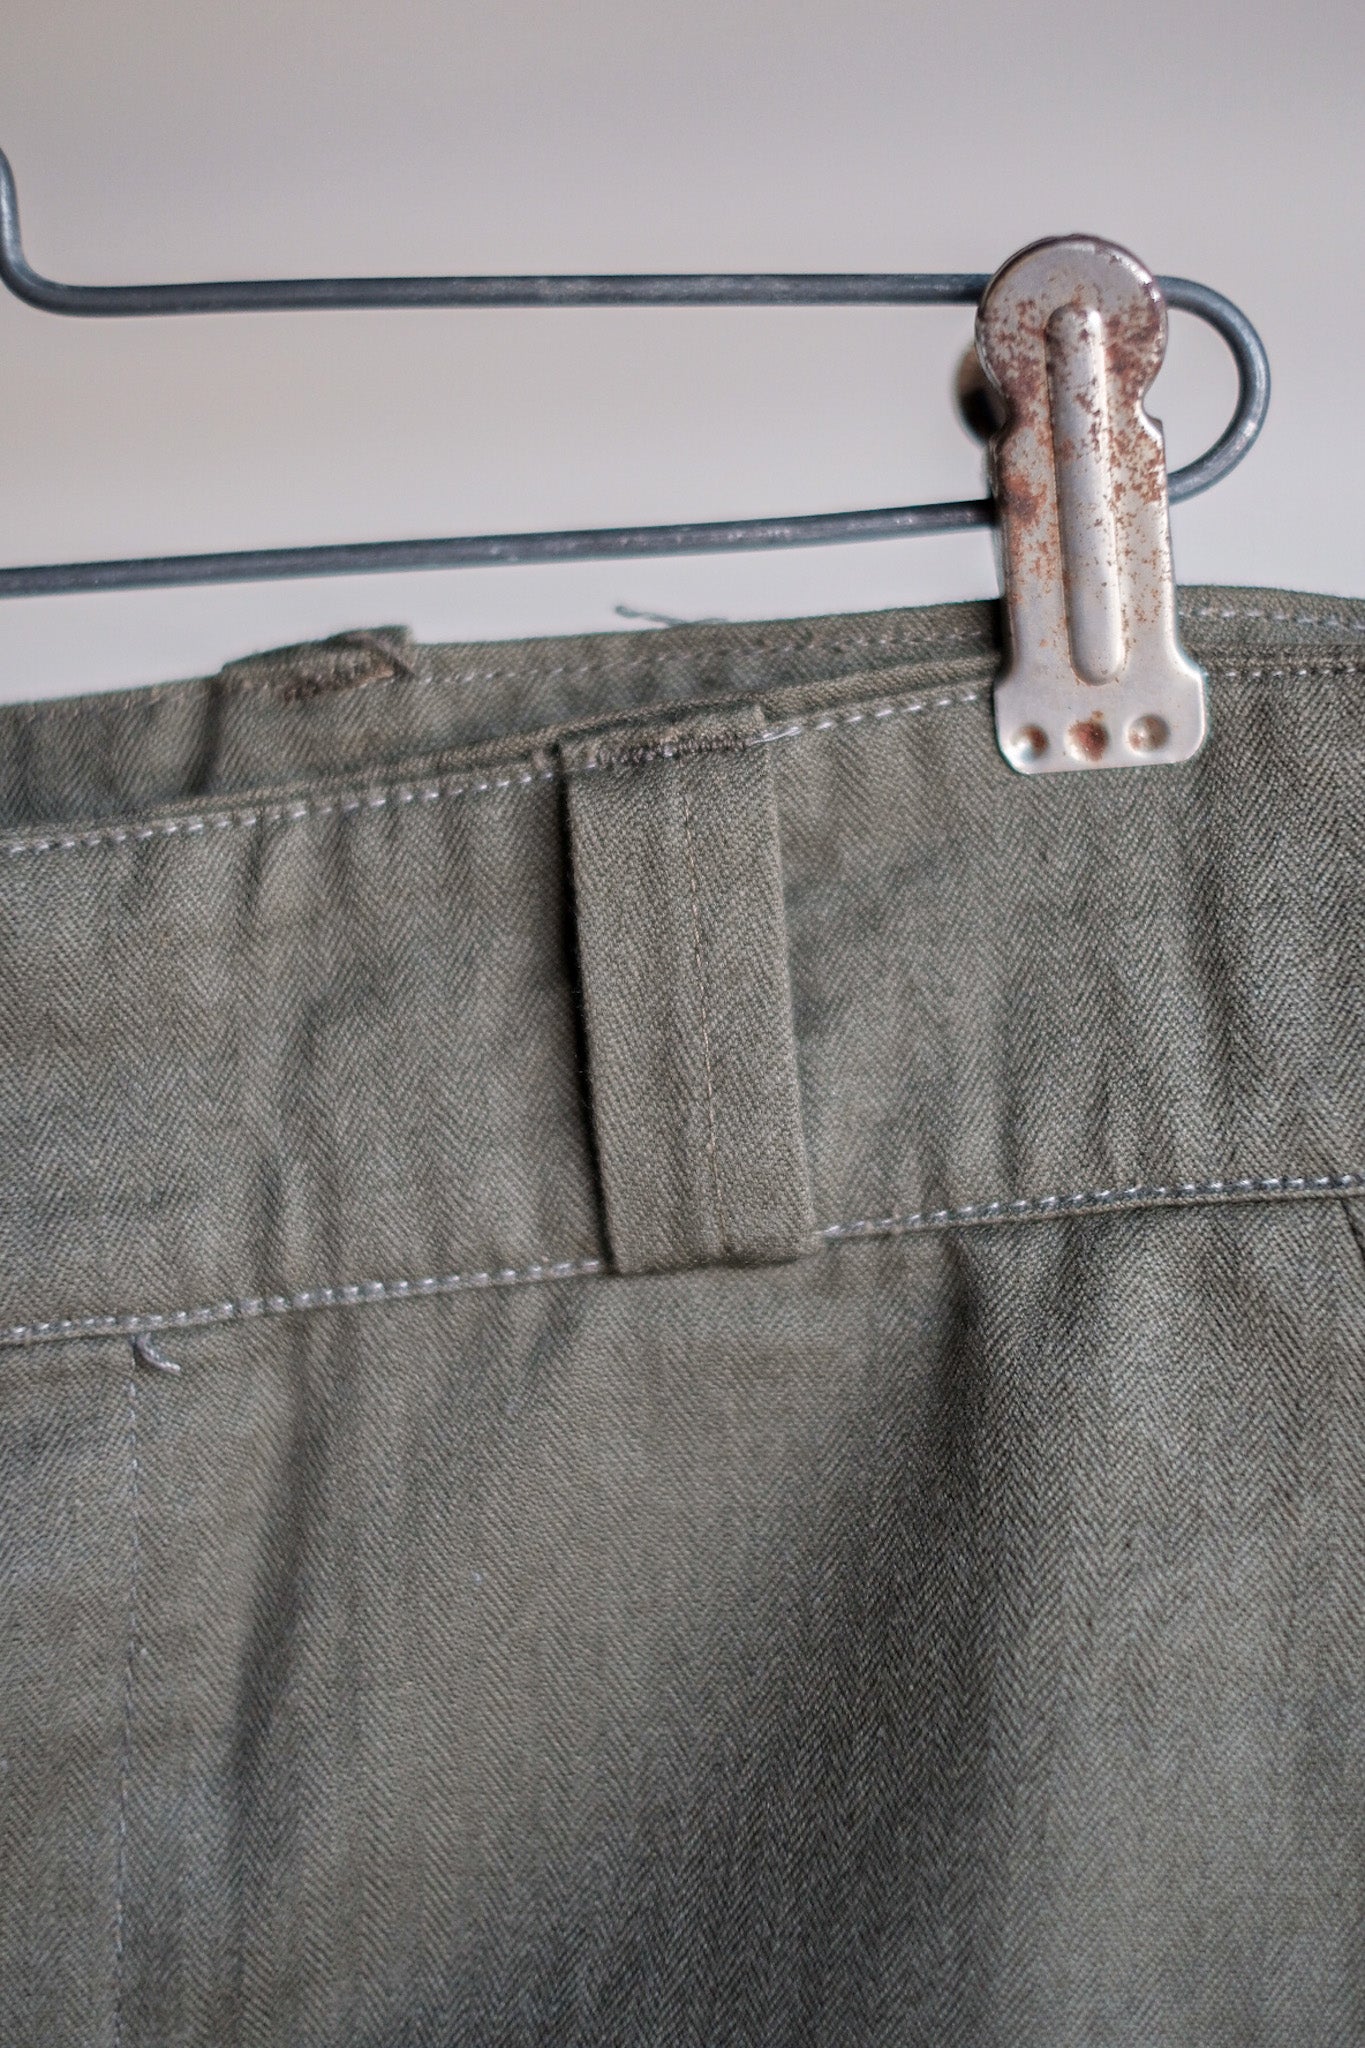 [~ 60's] French Army M47 Field Trousers Size.13 "Dead Stock"